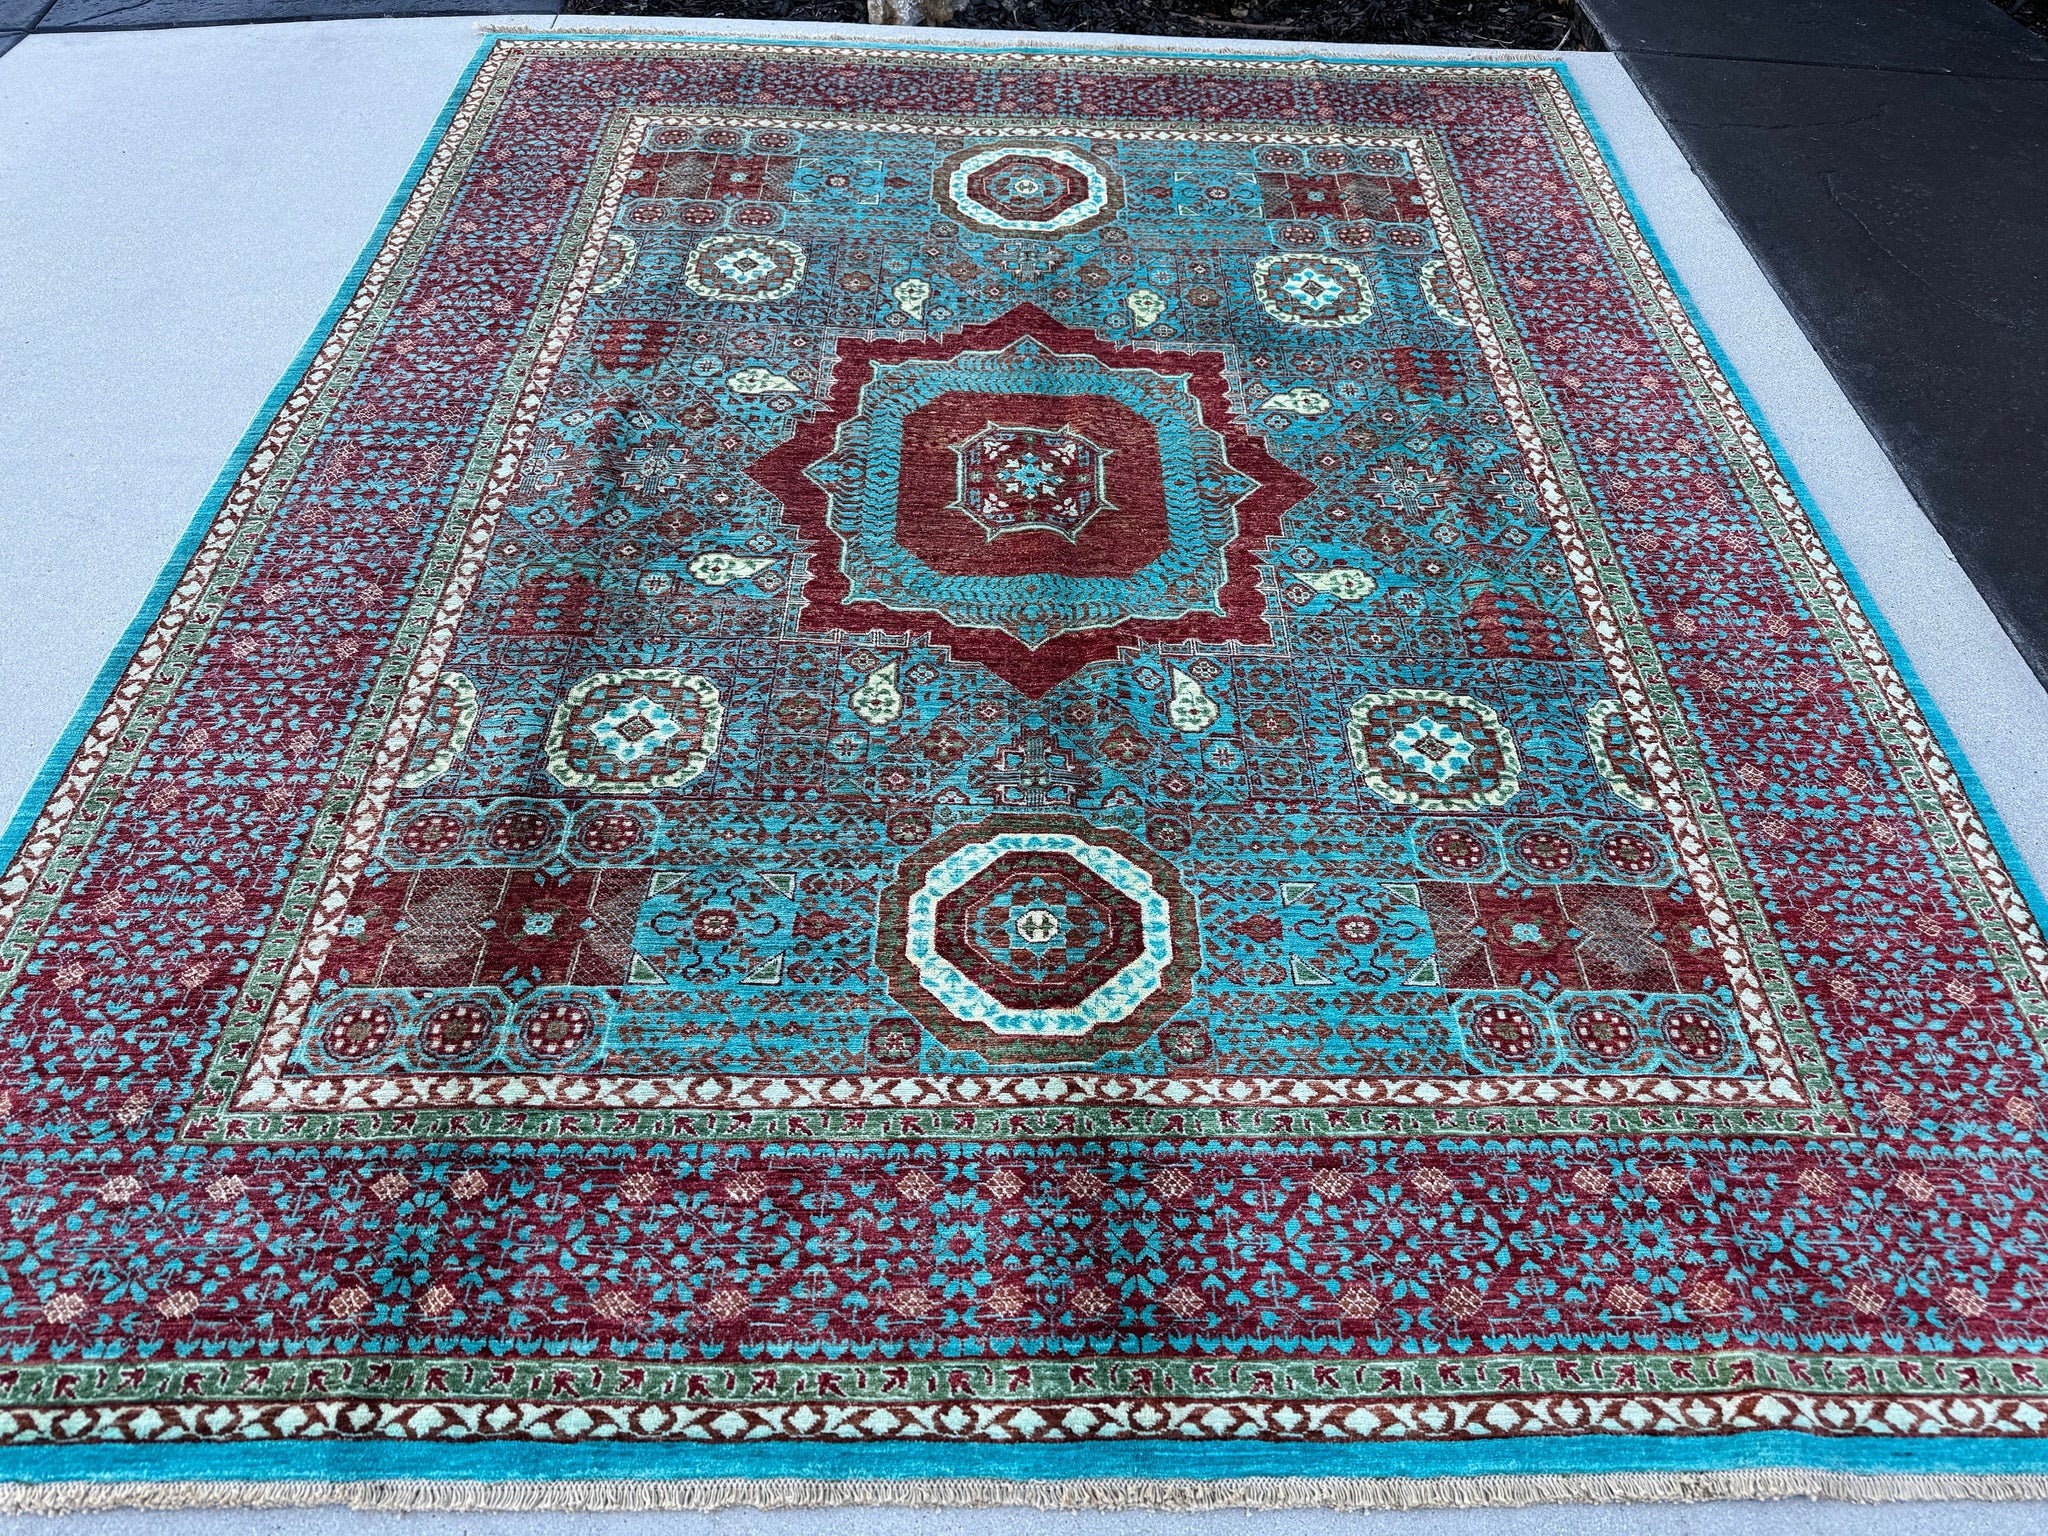 8x10 (240 x305) Handmade Afghan Rug | Teal Turquoise Auburn Blood Red Ivory Cream Moss Green Black | Wool Hand Knotted Nature